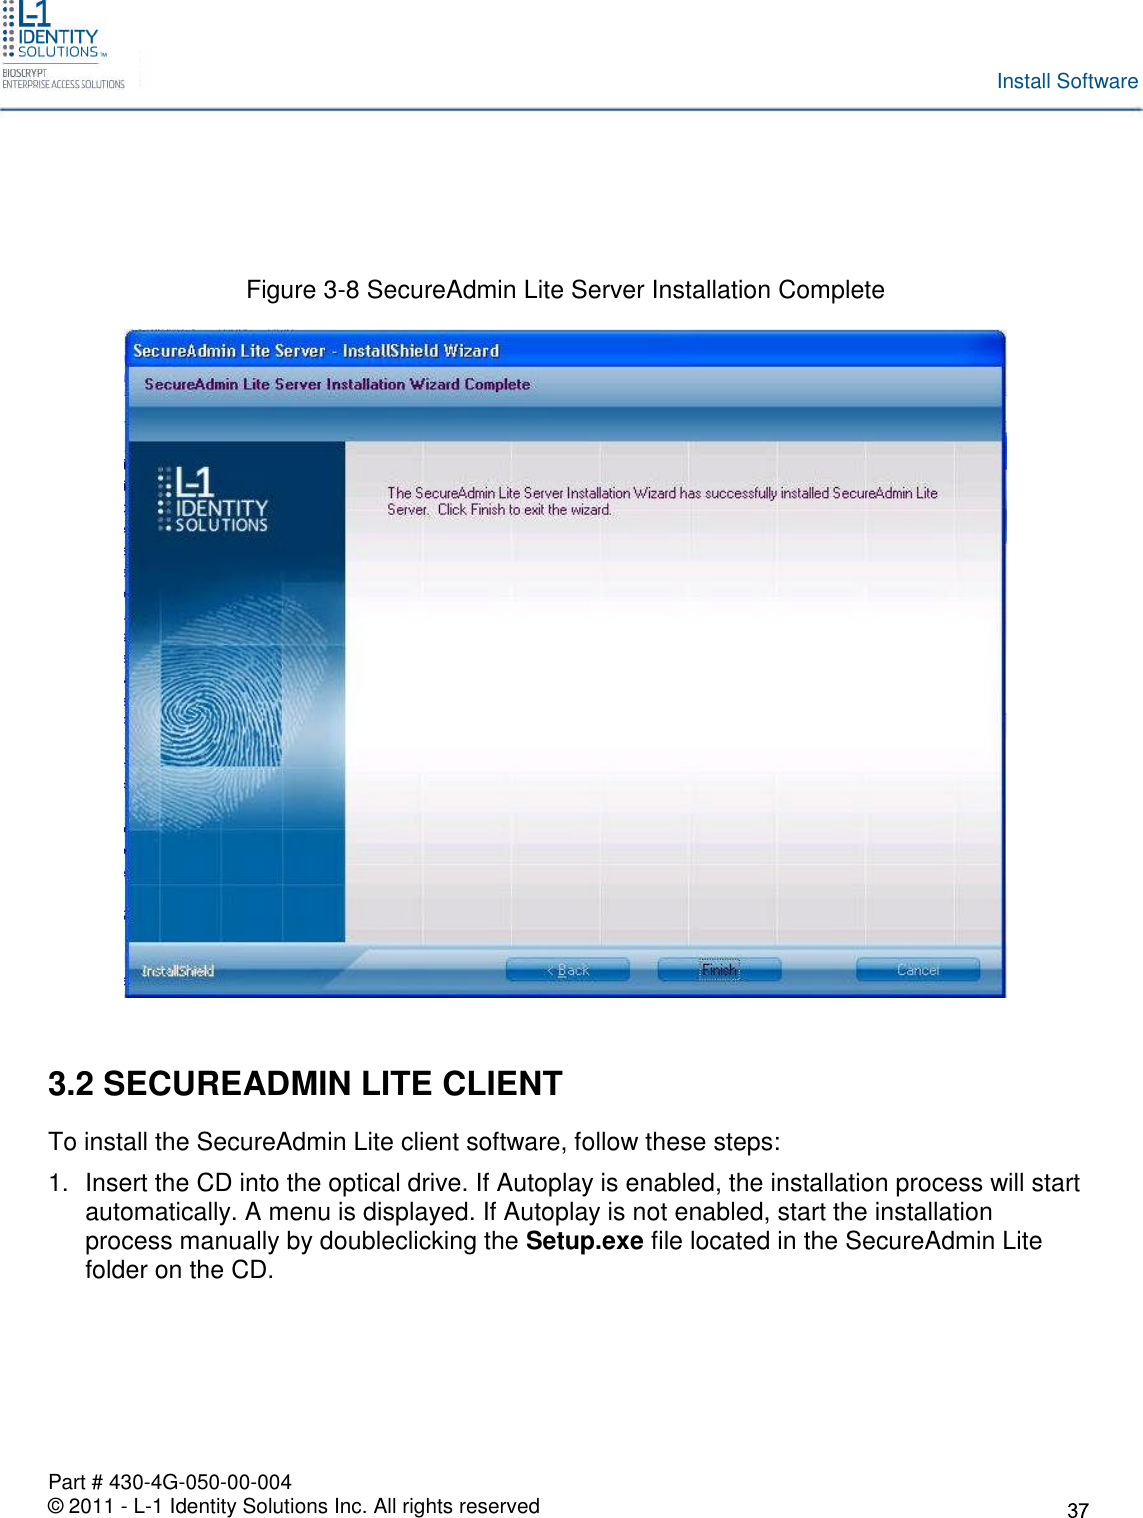 Part # 430-4G-050-00-004© 2011 - L-1 Identity Solutions Inc. All rights reservedInstall SoftwareFigure 3-8 SecureAdmin Lite Server Installation Complete3.2 SECUREADMIN LITE CLIENTTo install the SecureAdmin Lite client software, follow these steps:1. Insert the CD into the optical drive. If Autoplay is enabled, the installation process will startautomatically. A menu is displayed. If Autoplay is not enabled, start the installationprocess manually by doubleclicking the Setup.exe file located in the SecureAdmin Litefolder on the CD.